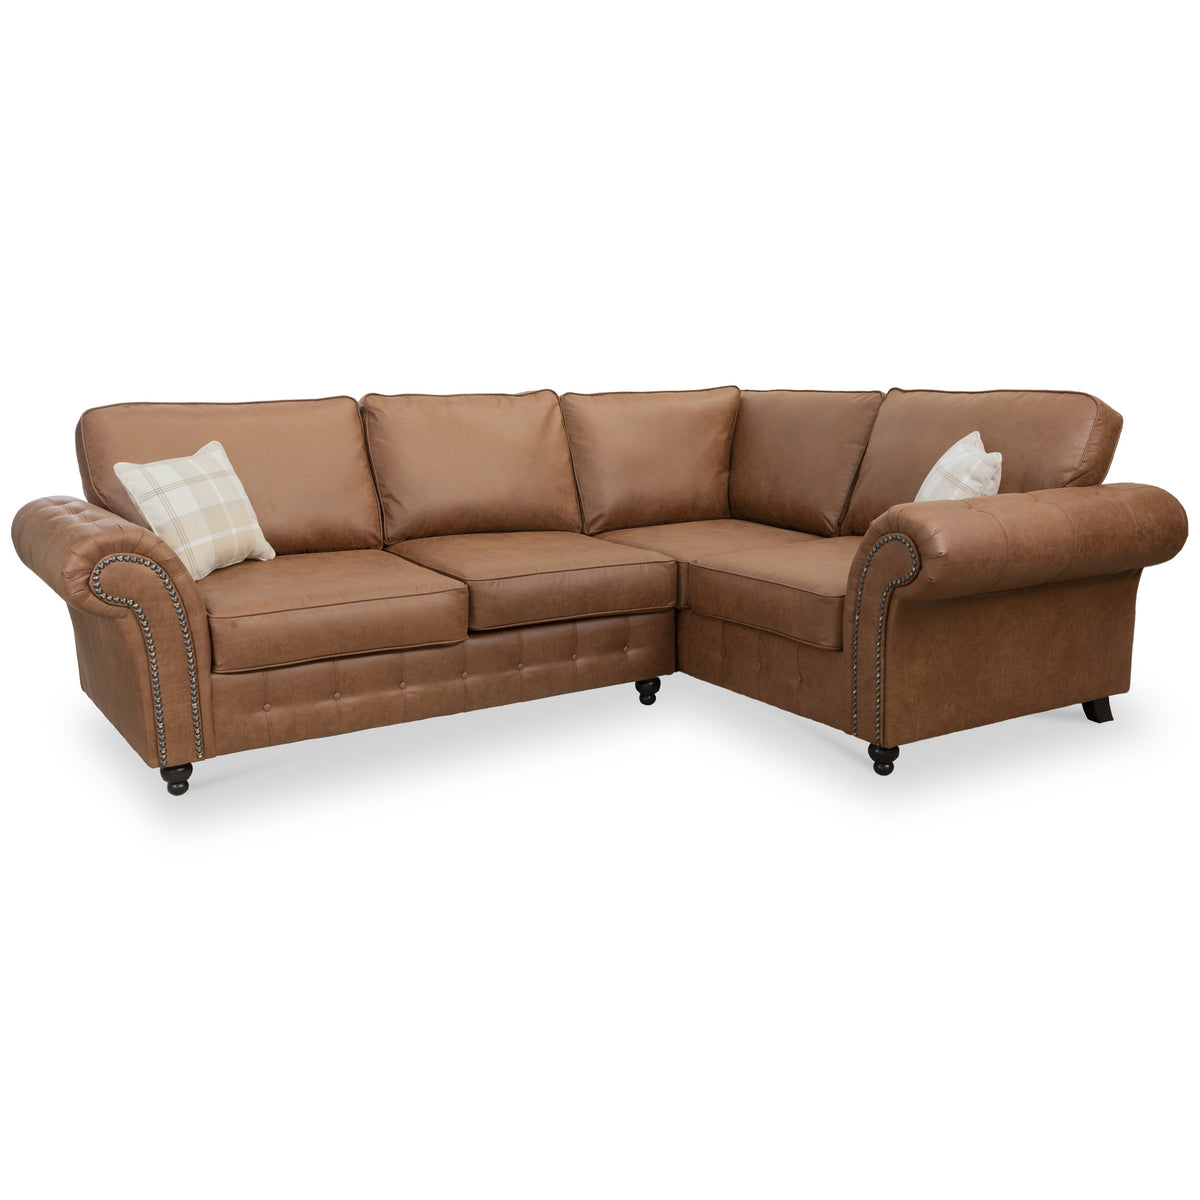 Edward Chocolate Faux Leather Right Hand Corner Sofa from Roseland Furniture